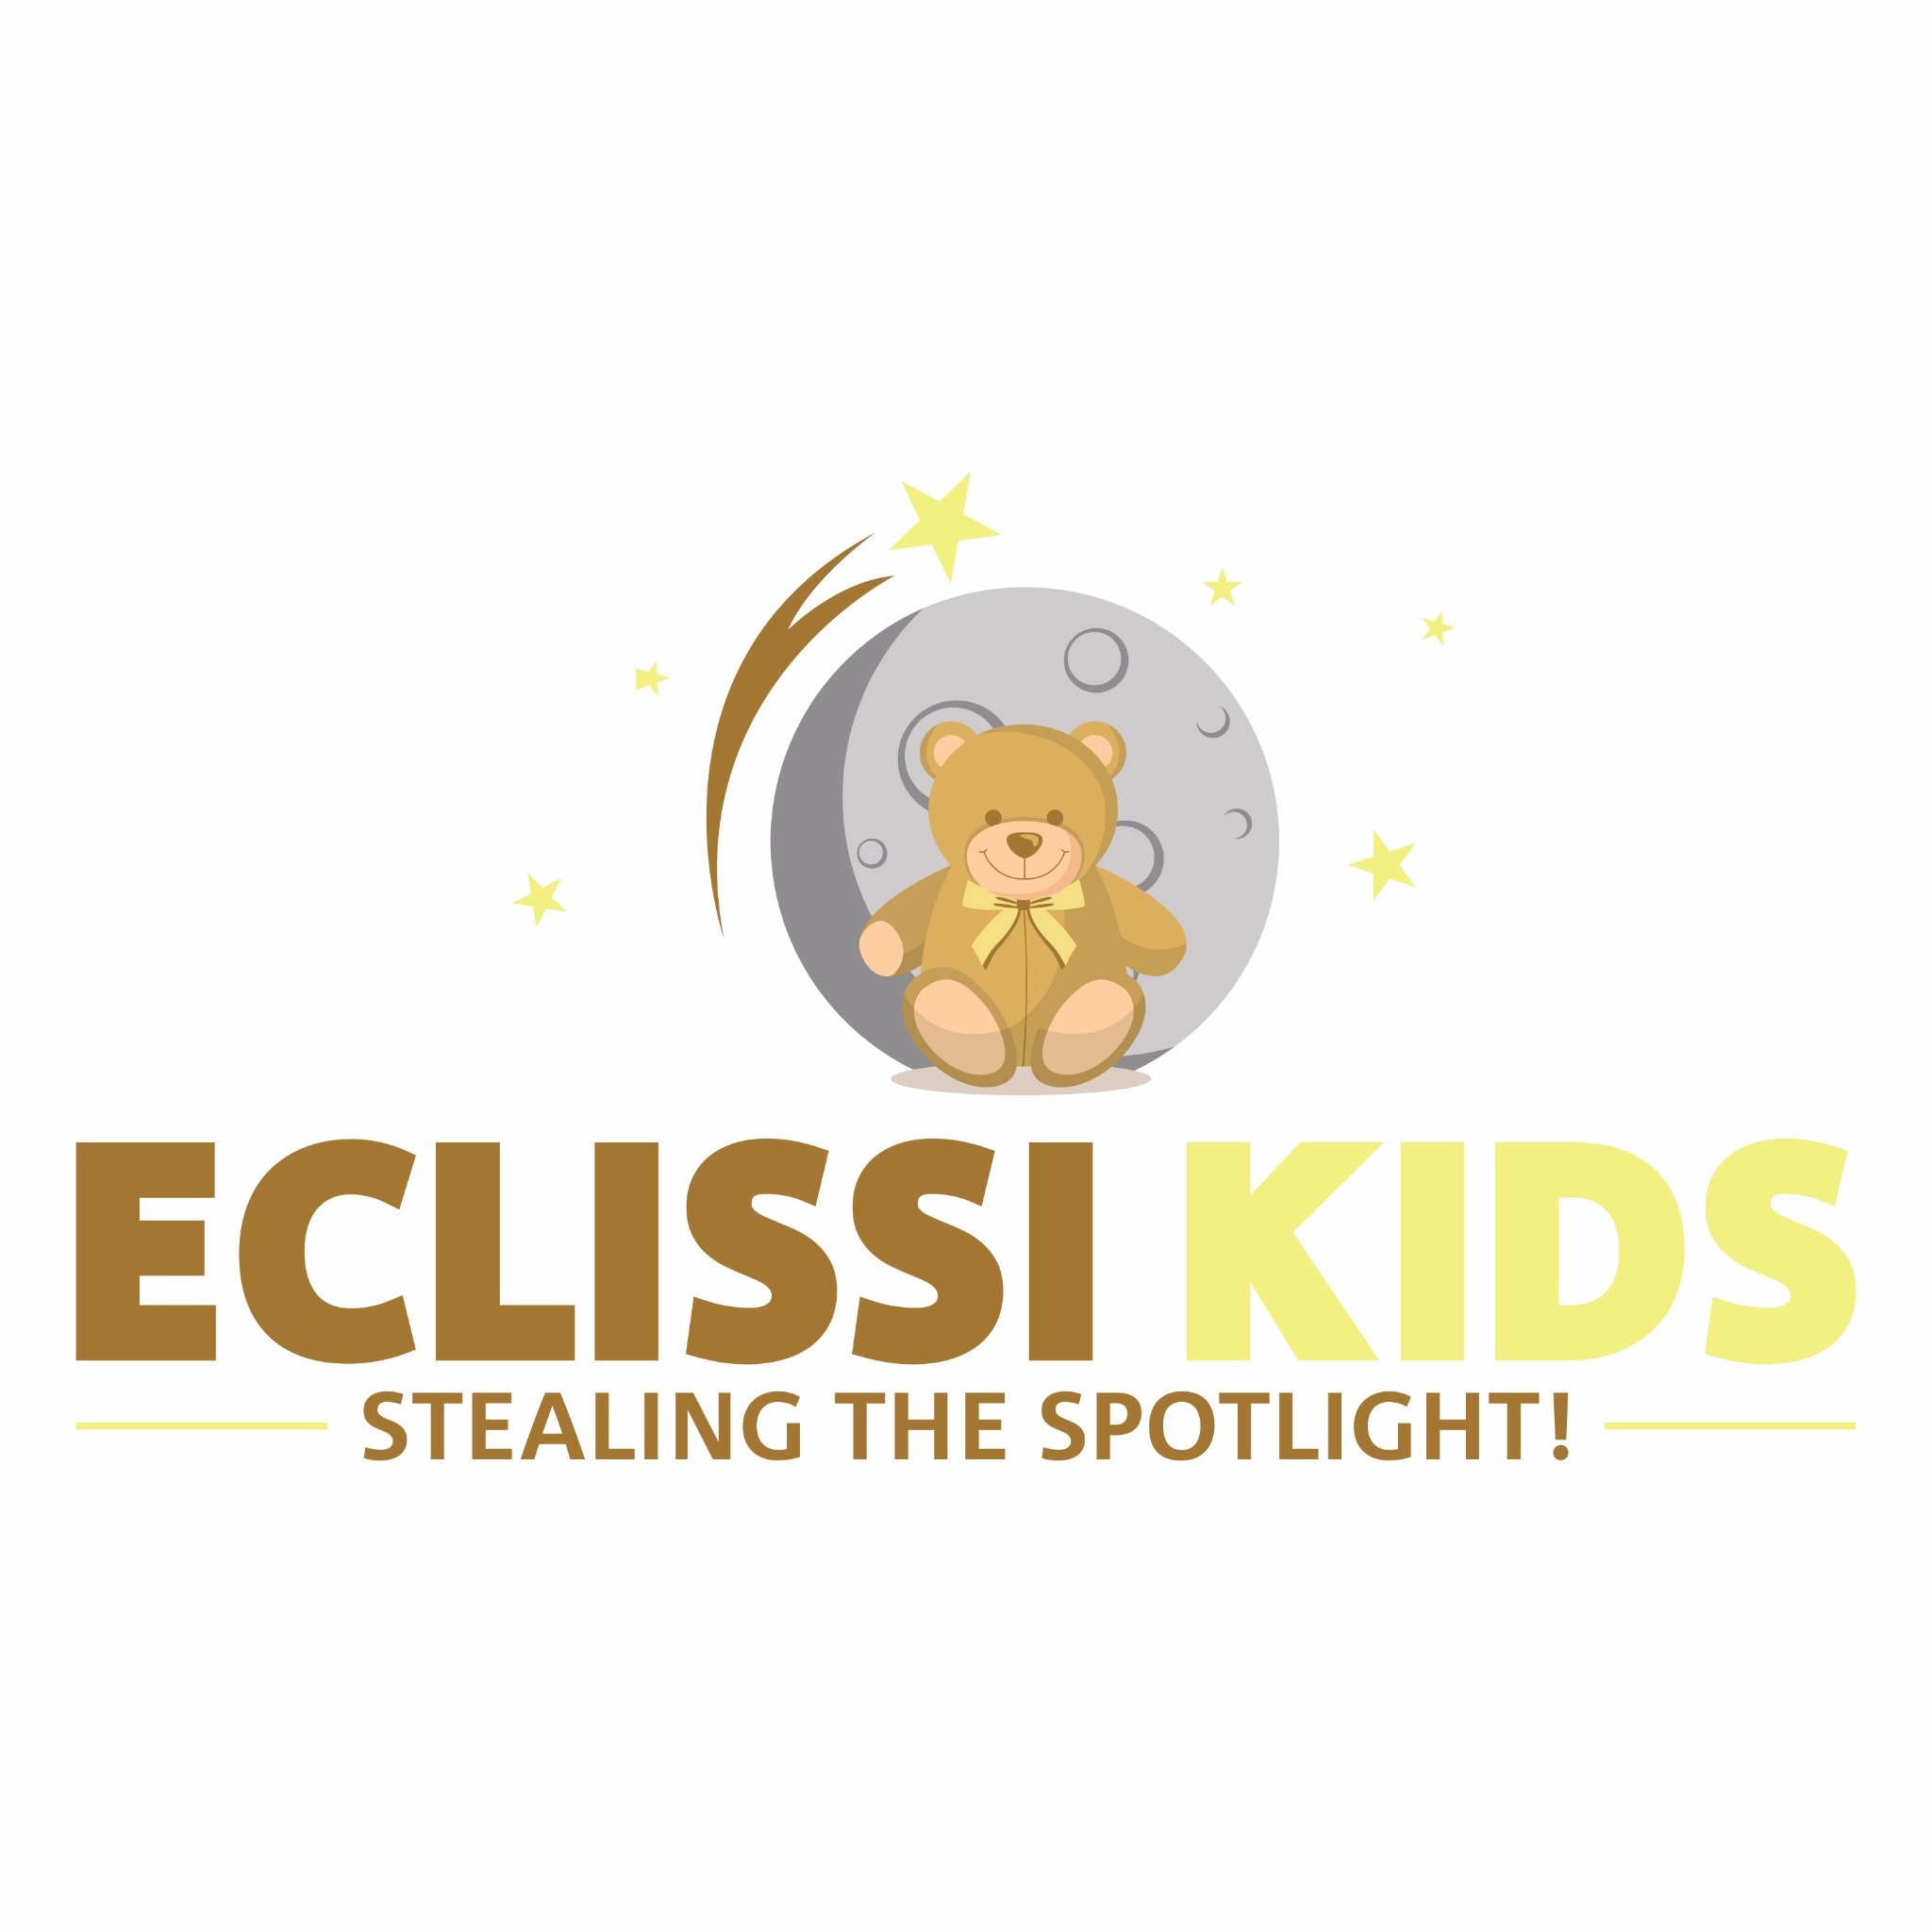 Eclissi Kids was formed by an ambitious team of two tenacious individuals with the purpose of planning the BEST kids events in Barbados!